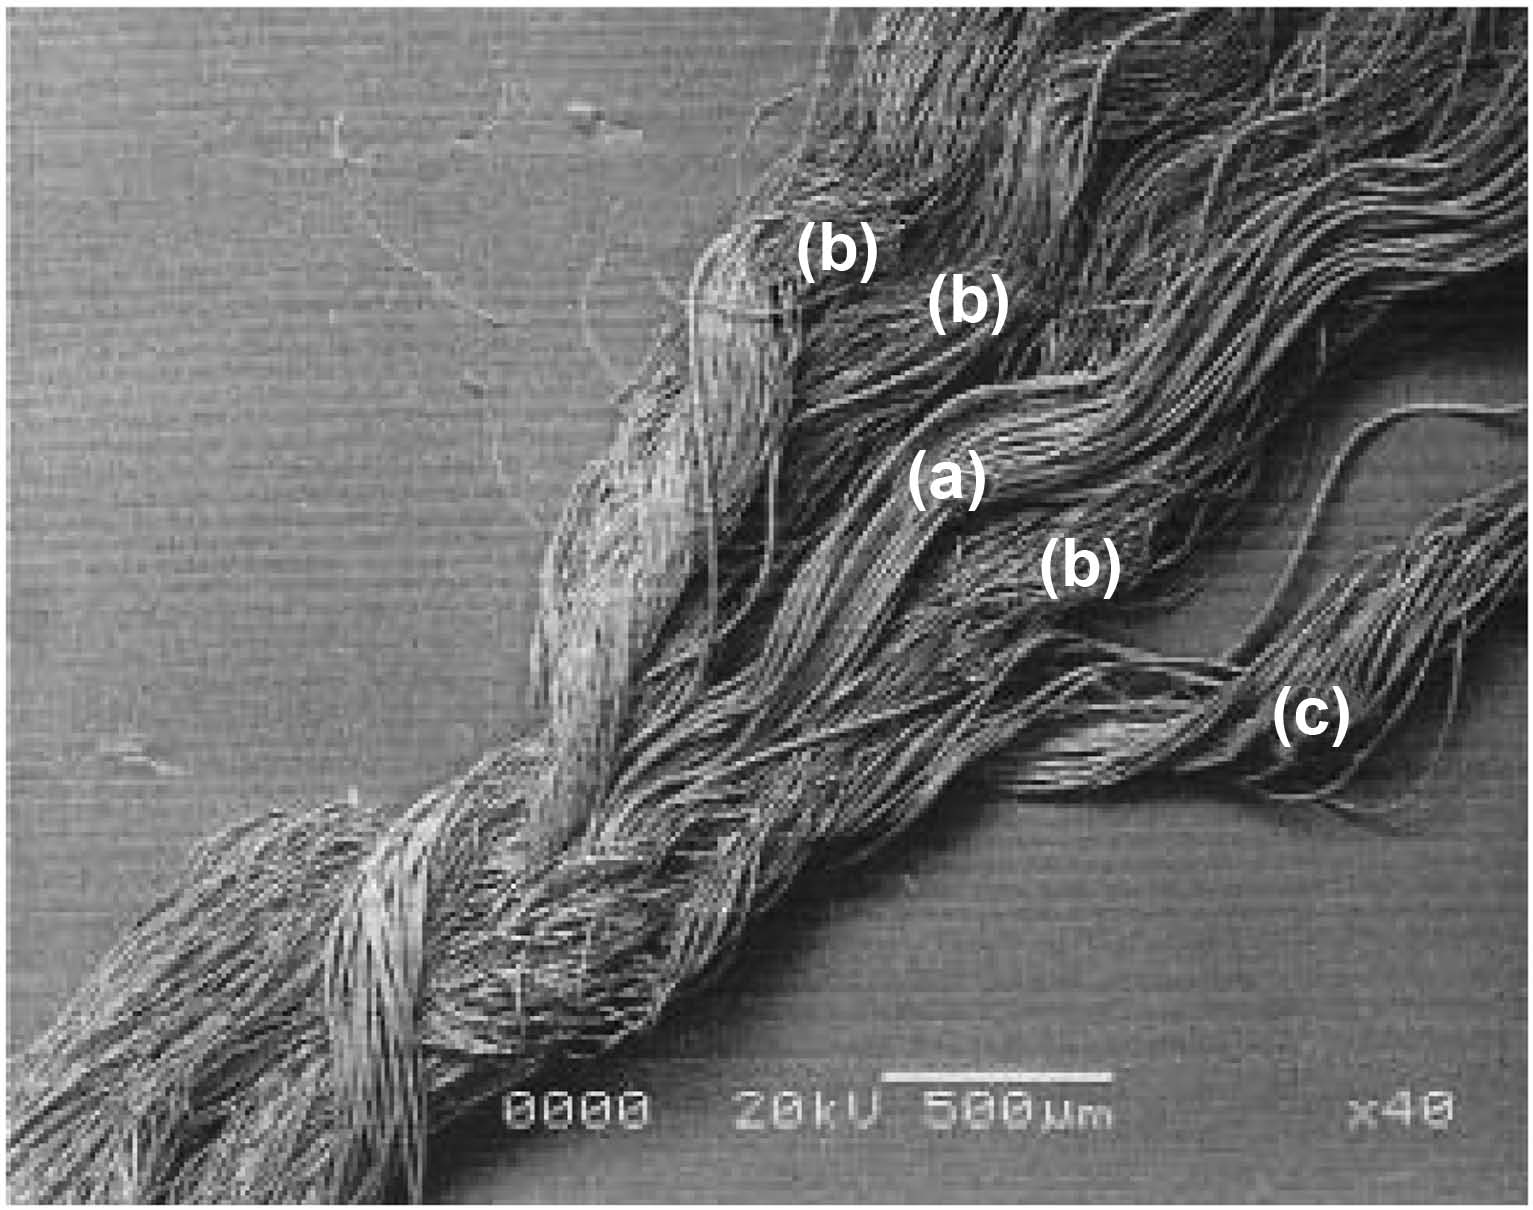 SEM photography of structure of the fancy yarn used as weft (×40); (a) inner yarn part, (b) effect yarn part, (c) binding yarn part.